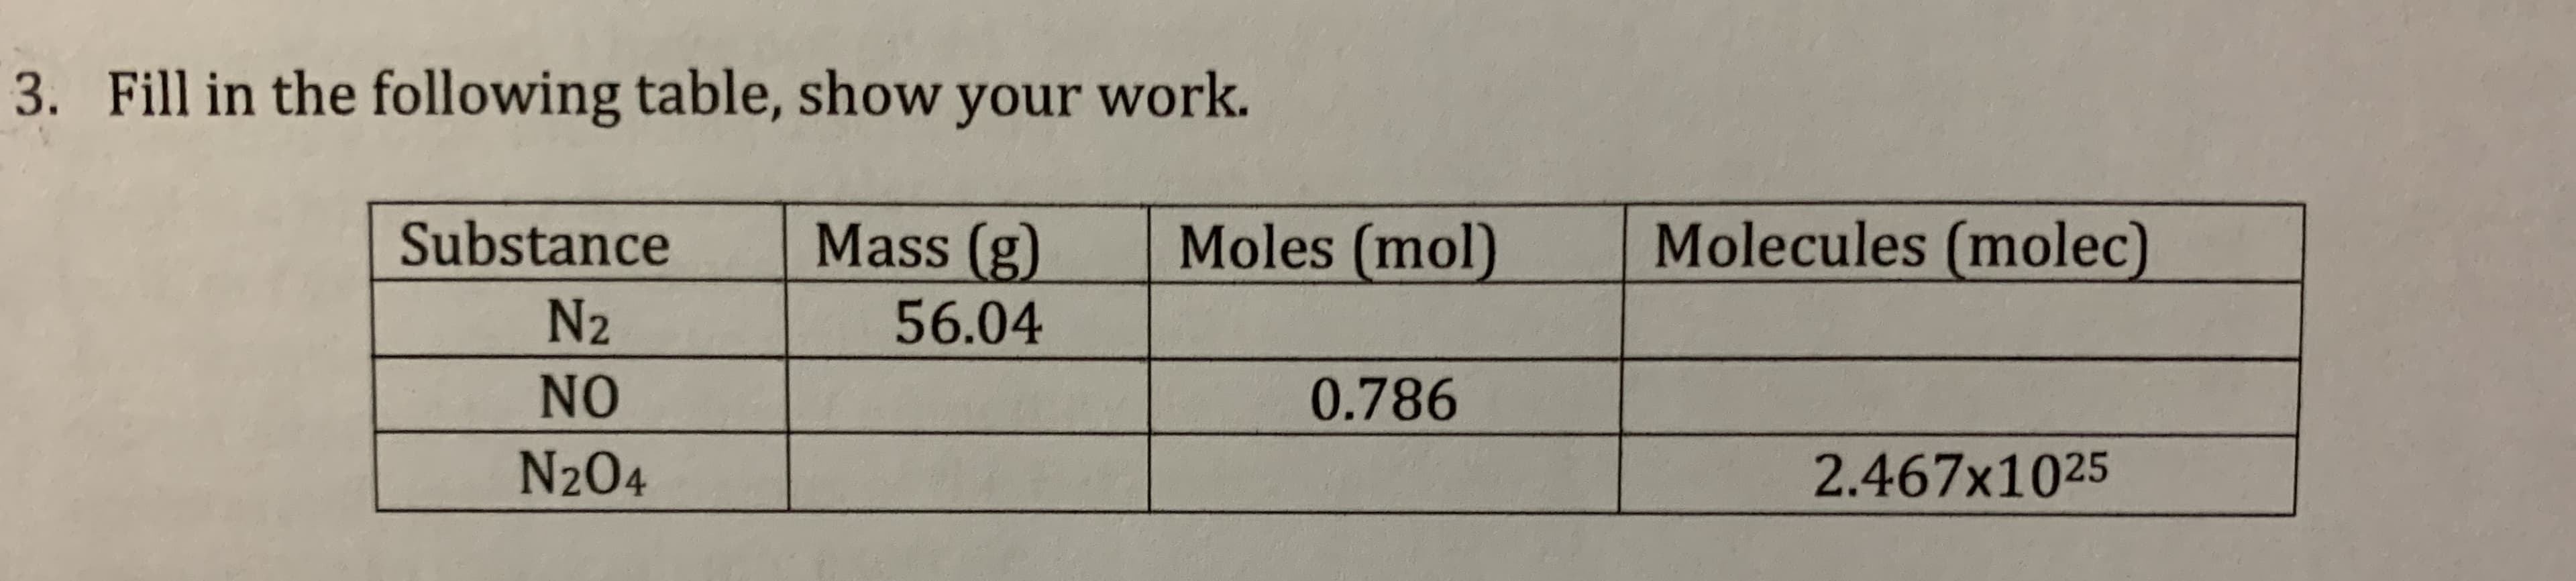 Fill in the following table, show your work.
Substance
Mass (g)
Moles (mol)
Molecules (molec)
N2
56.04
NO
0.786
N204
2.467x1025
